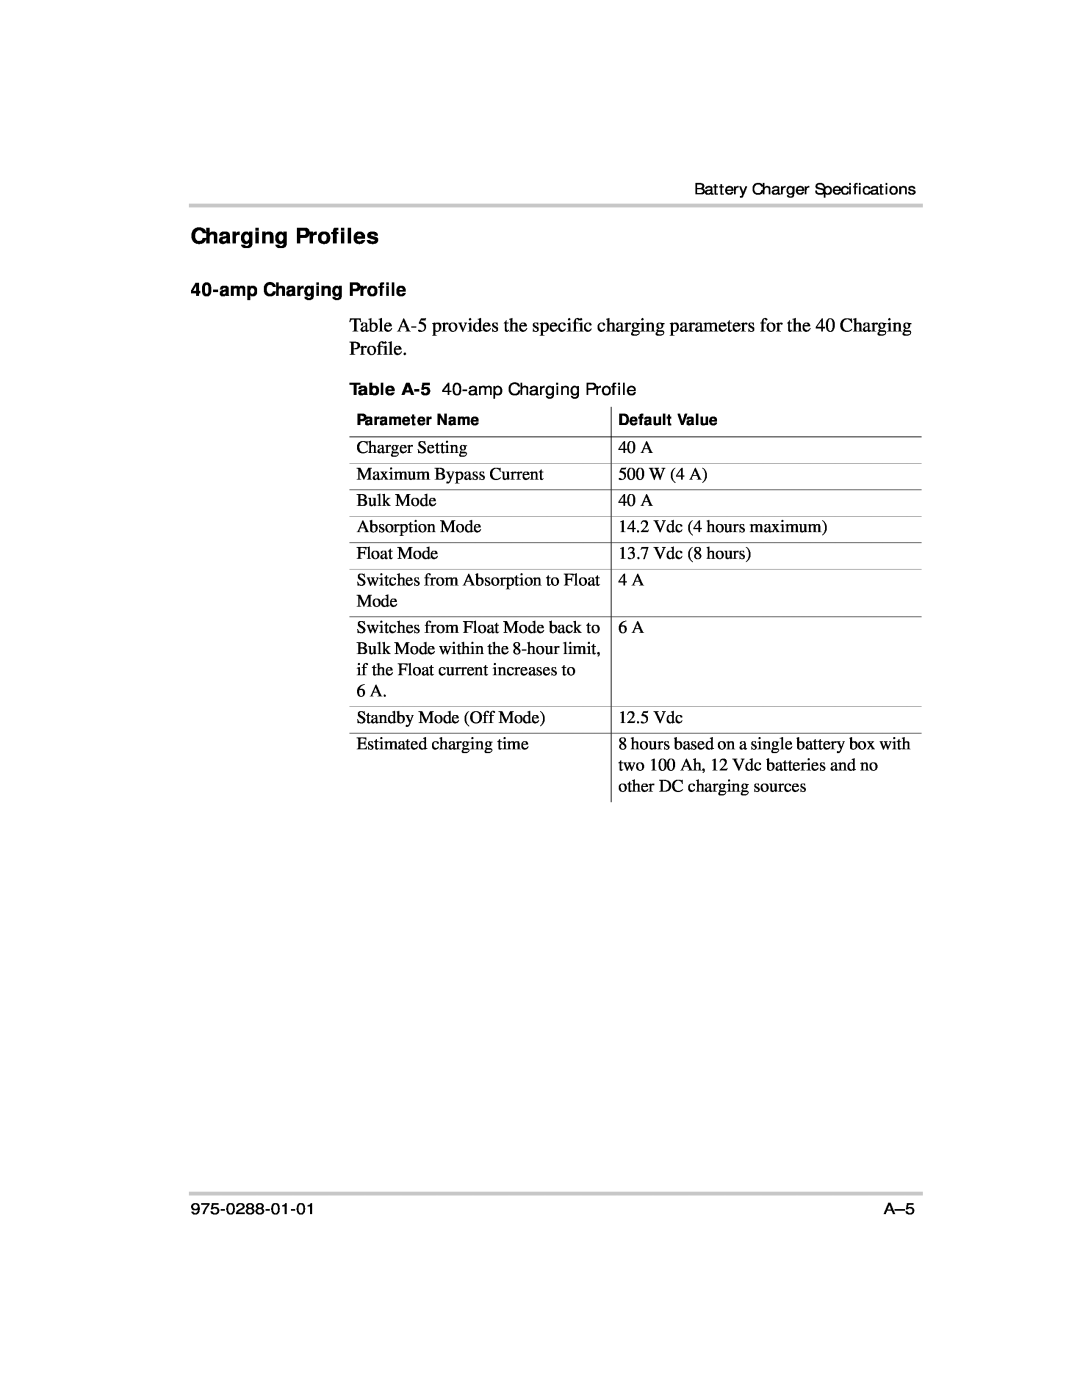 Xantrex Technology PH1800 manual Charging Profiles, Table A-5 40-amp Charging Profile, Parameter Name, Default Value 